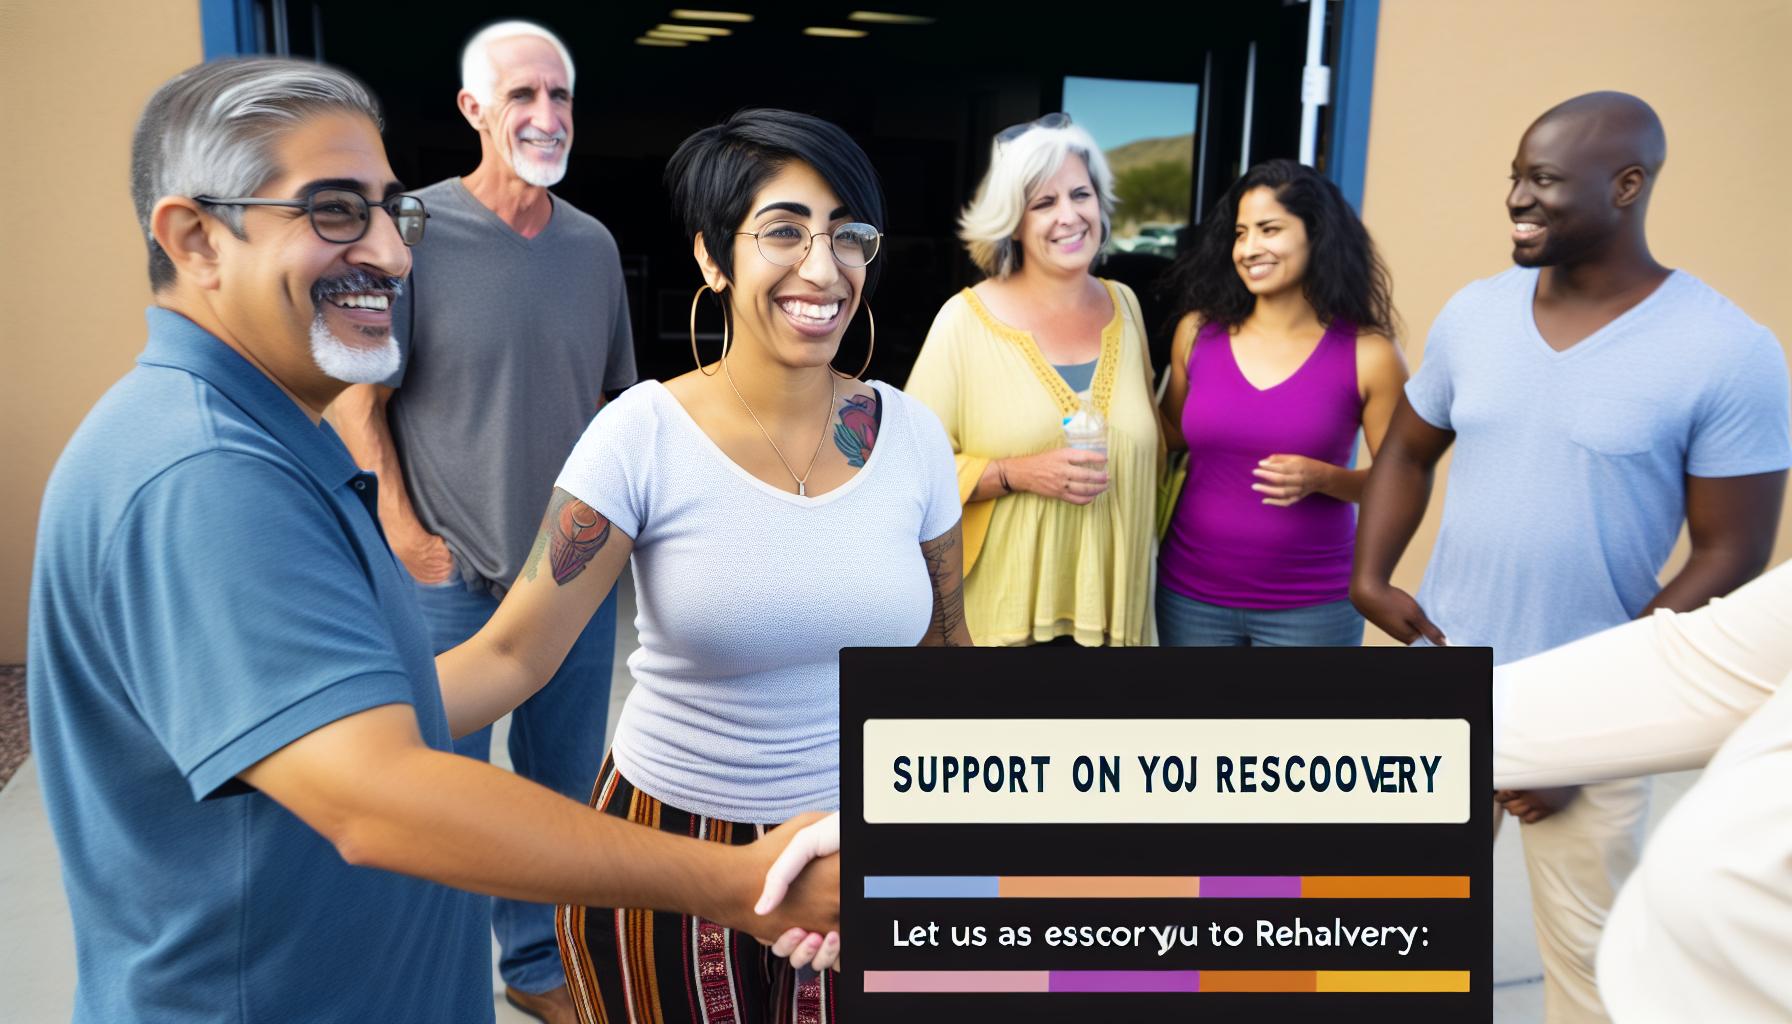 A group of individuals gather outside a rehabilitation center, chatting and smiling, while a caring escort from the company greets them and helps them